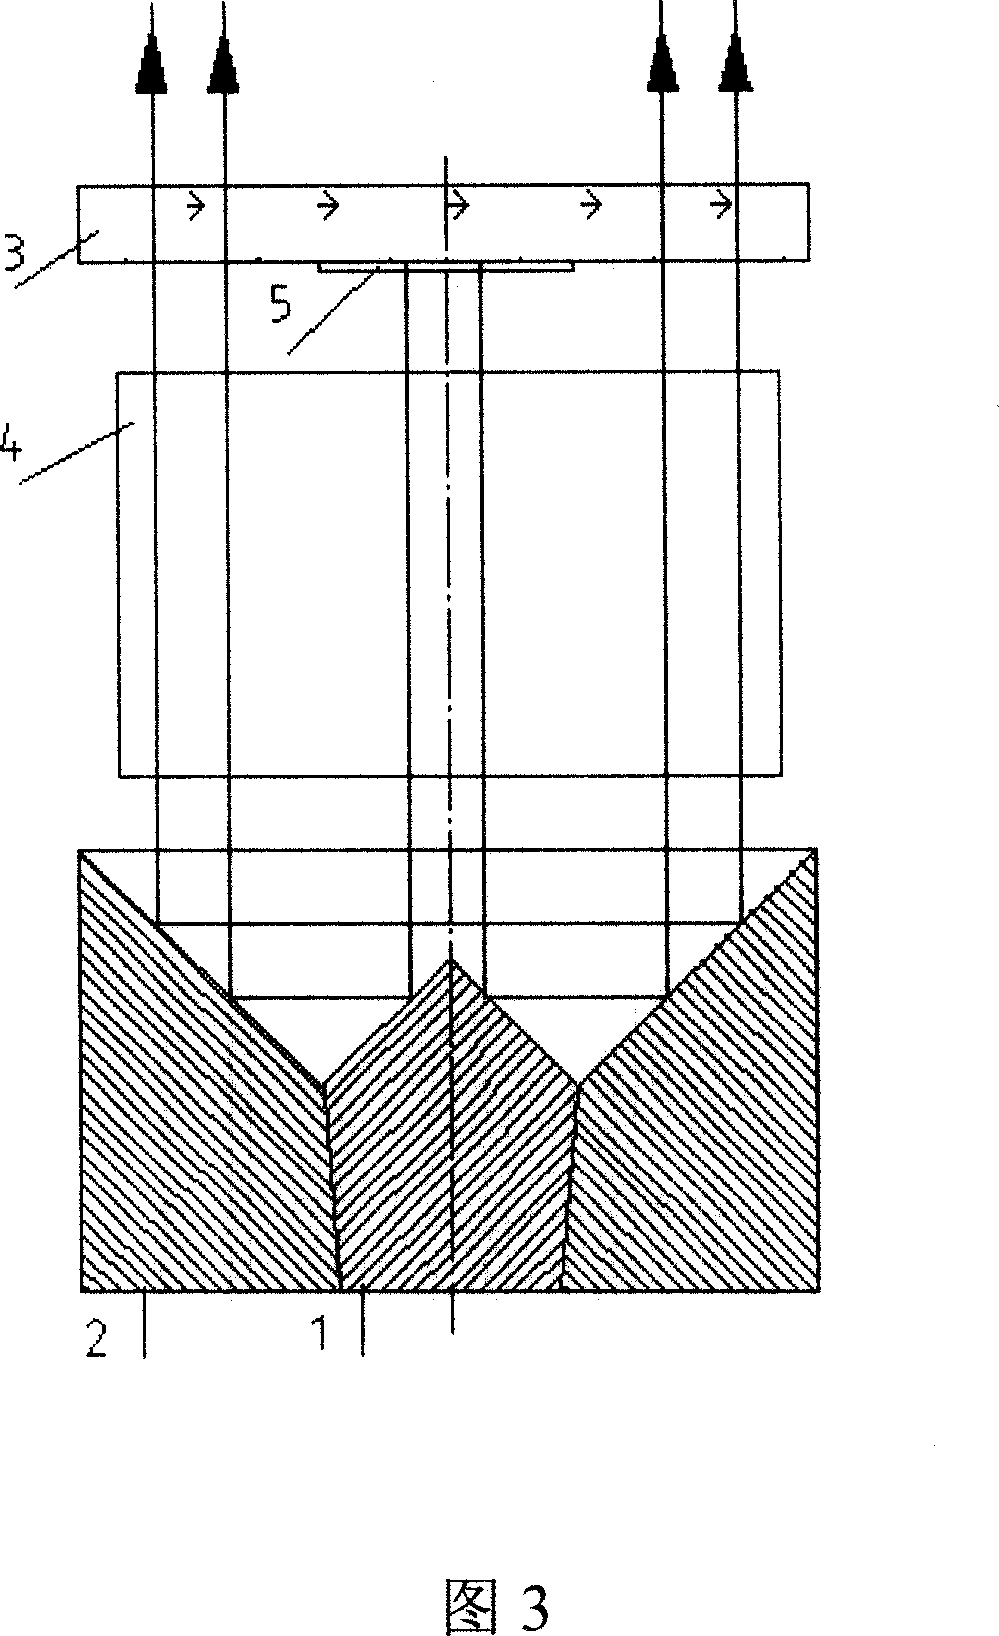 Laser resonance cavity of the combined full reflection mirror with the right-angle interval and external taper